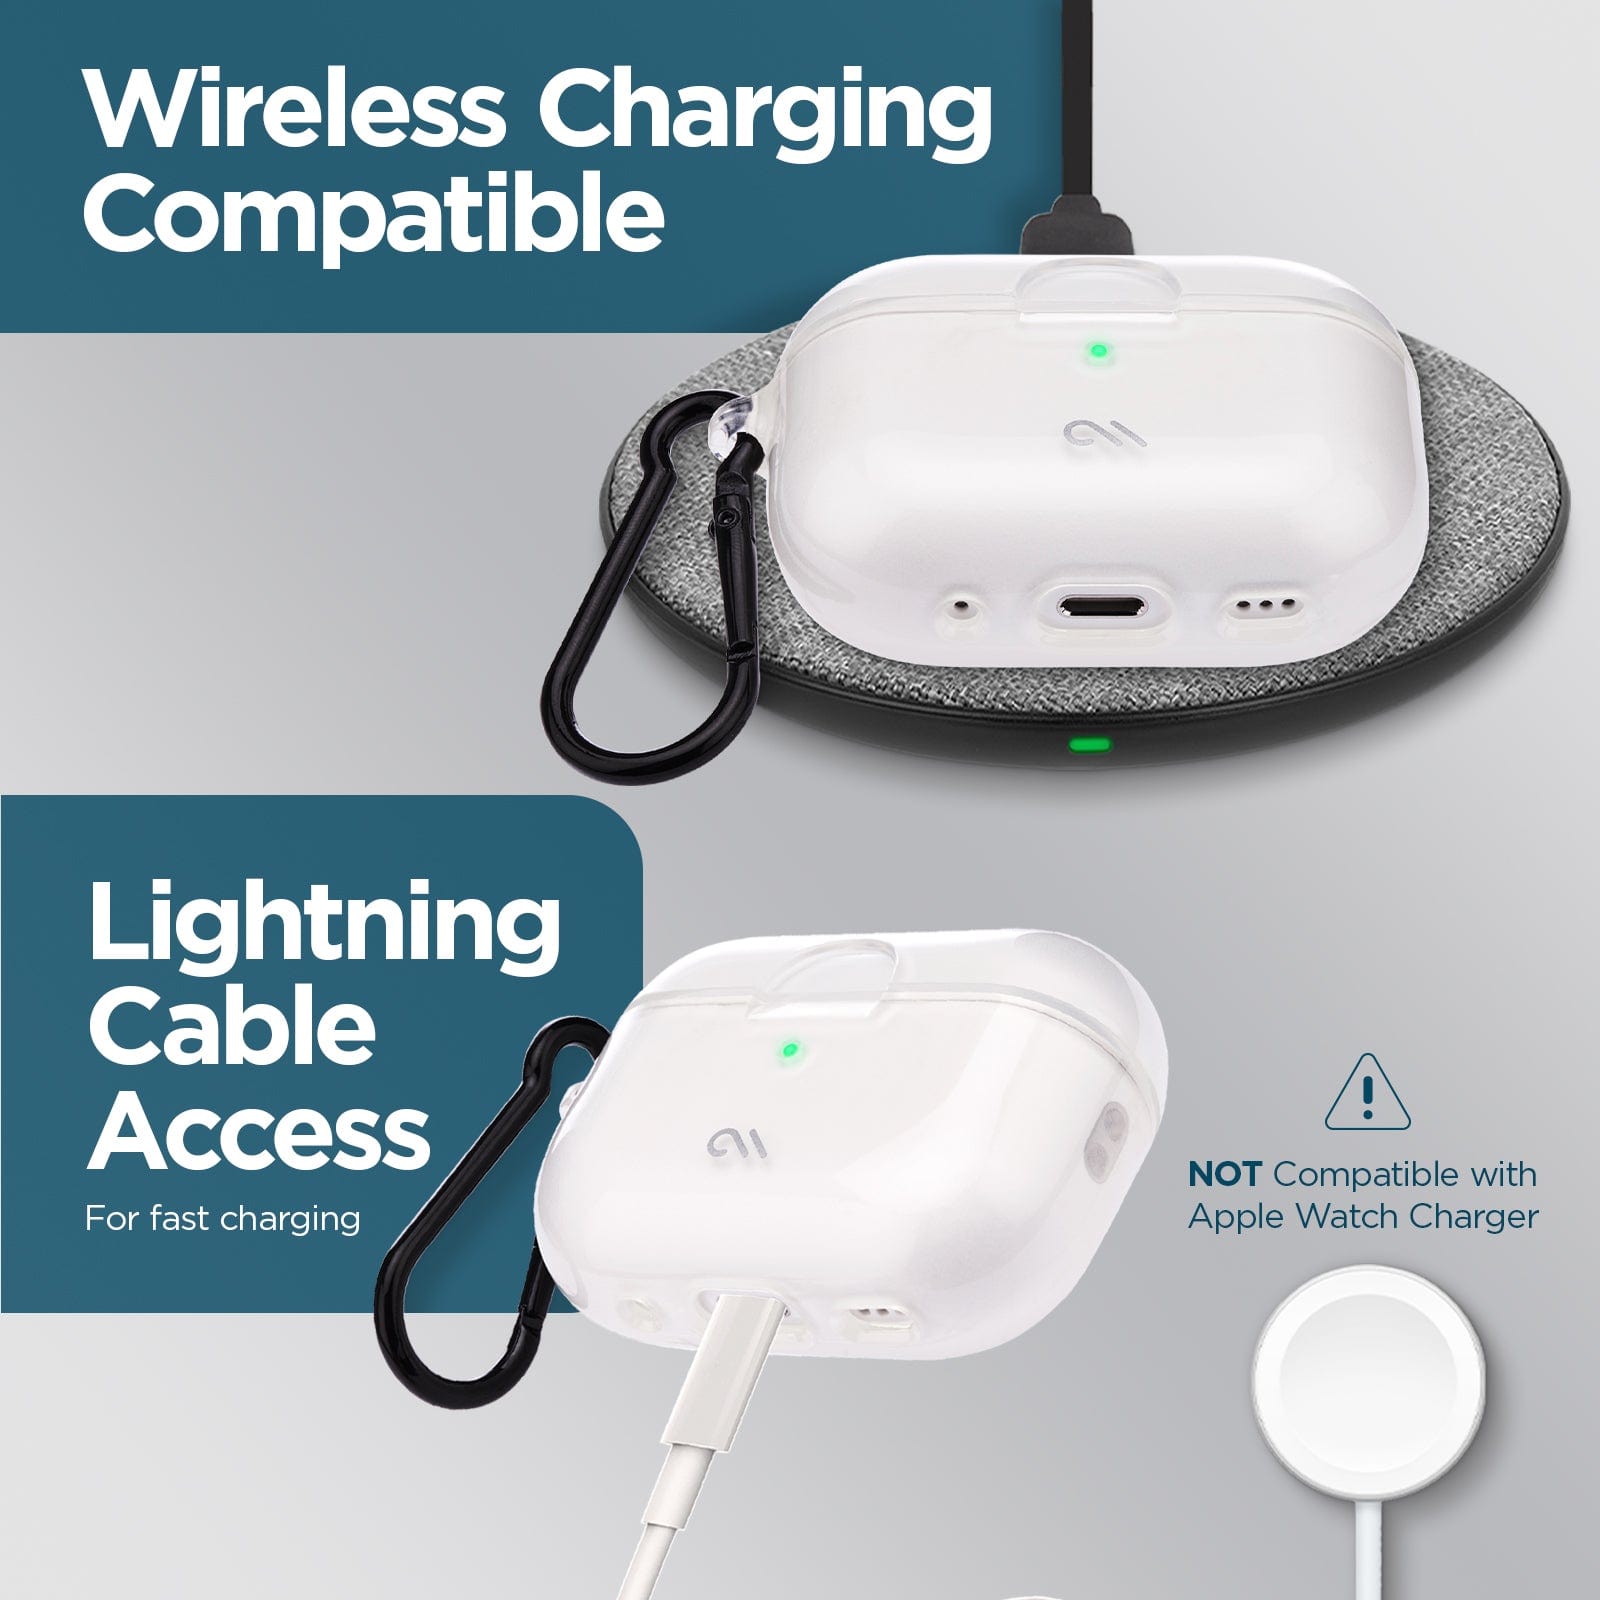 WIRELESS CHARGING COMPATIBLE. LIGHTNING CABLE ACCESS FOR FAST CHARGING. NOT COMPATIBLE WITH APPLE WATCH CHARGER